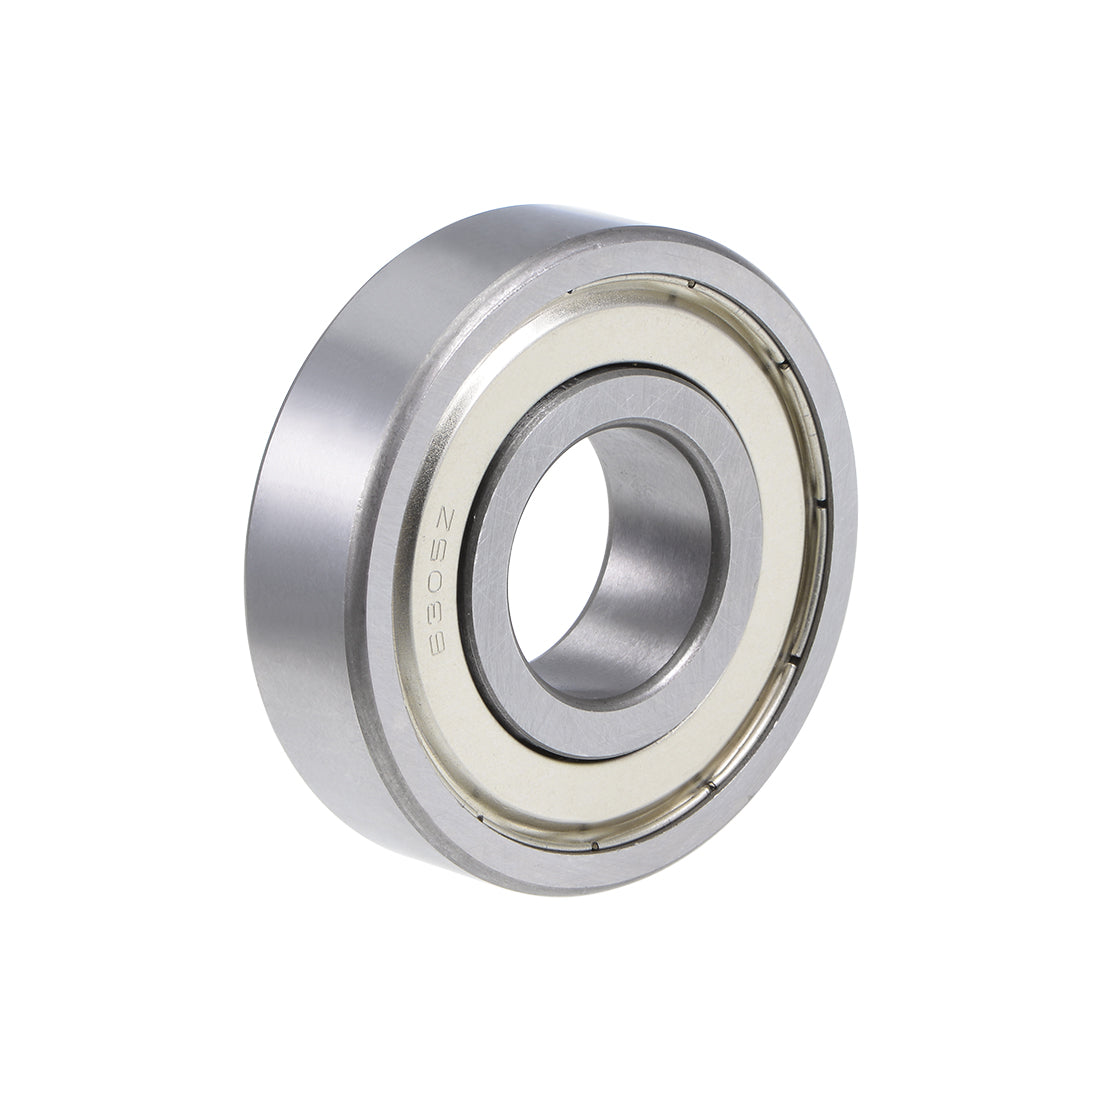 uxcell Uxcell Deep Groove Ball Bearings  Metric Double Shielded Chrome Steel ABEC1 Z1